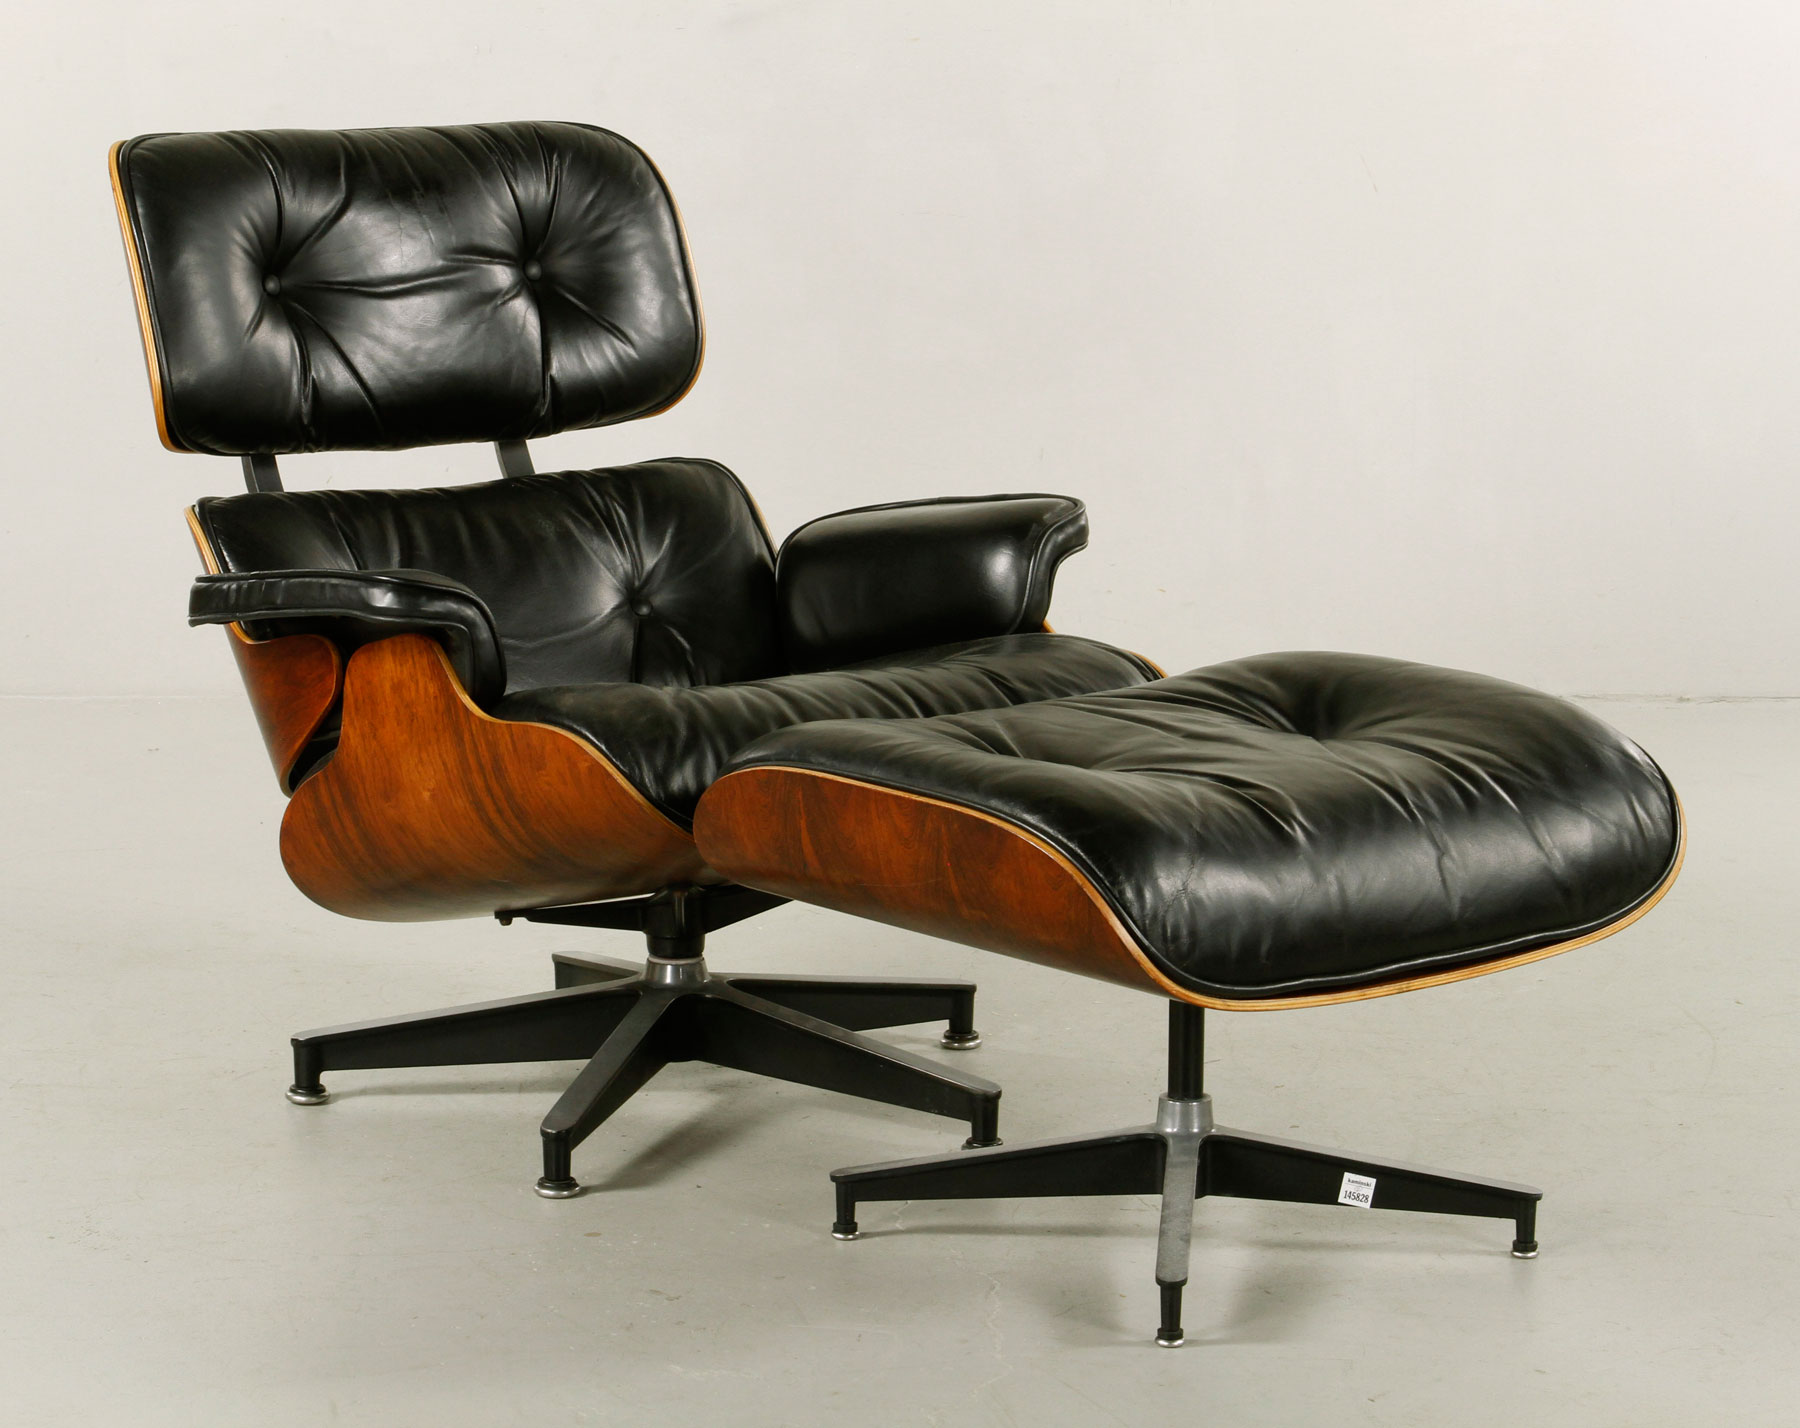 Charles and Ray Eames for Herman Miller chair (#670)and ottoman (#671)